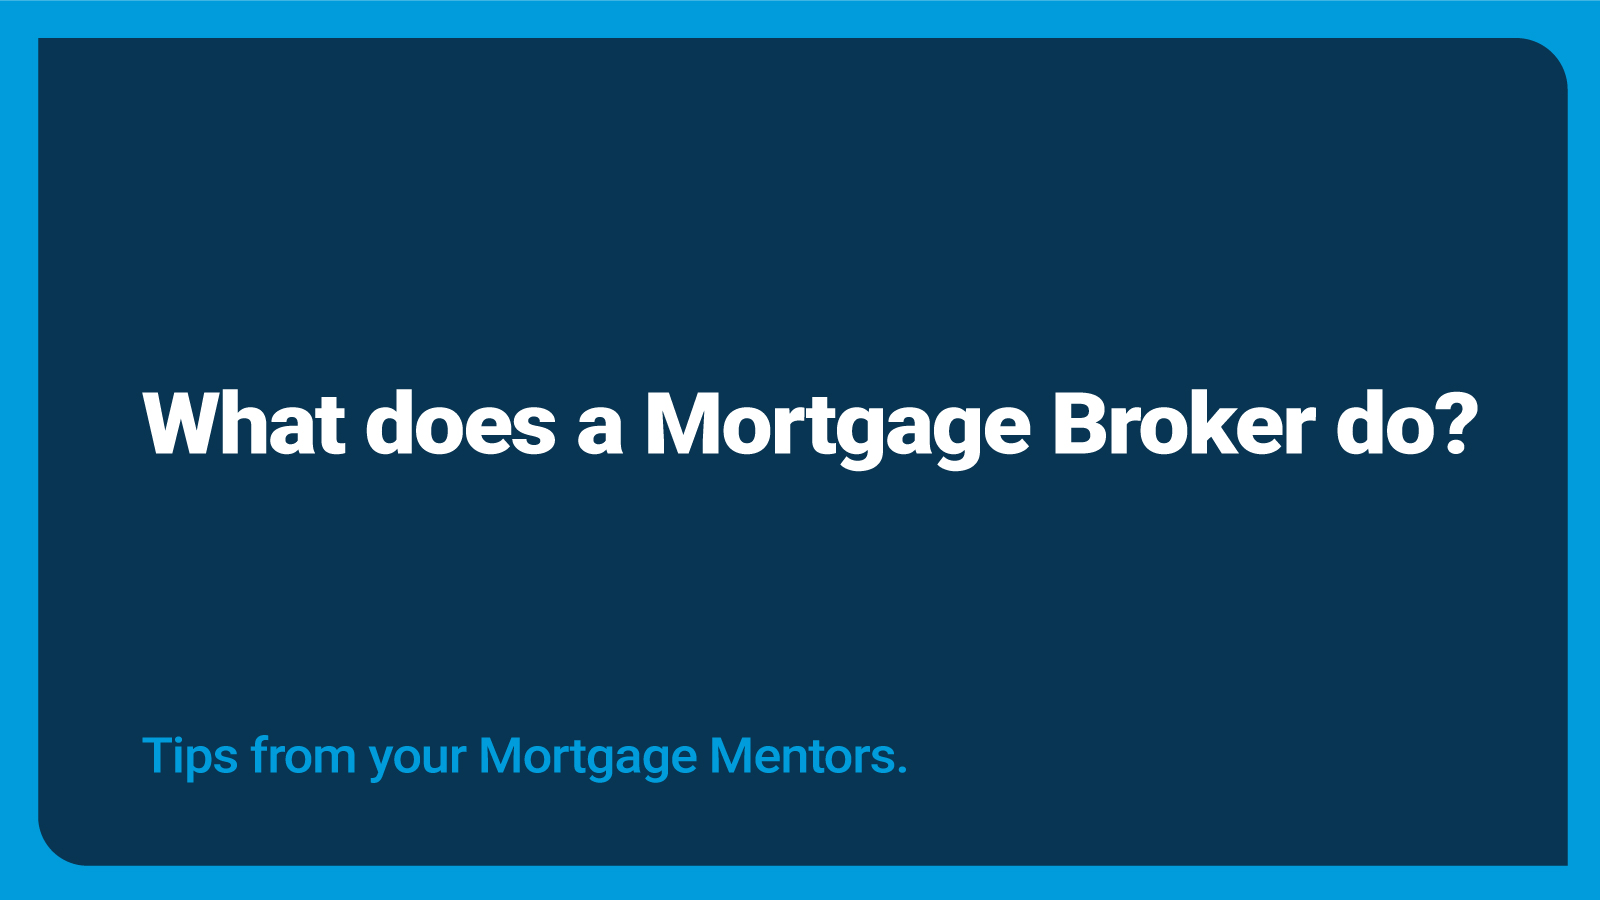 What Does a Mortgage Broker Do? Thumbnail